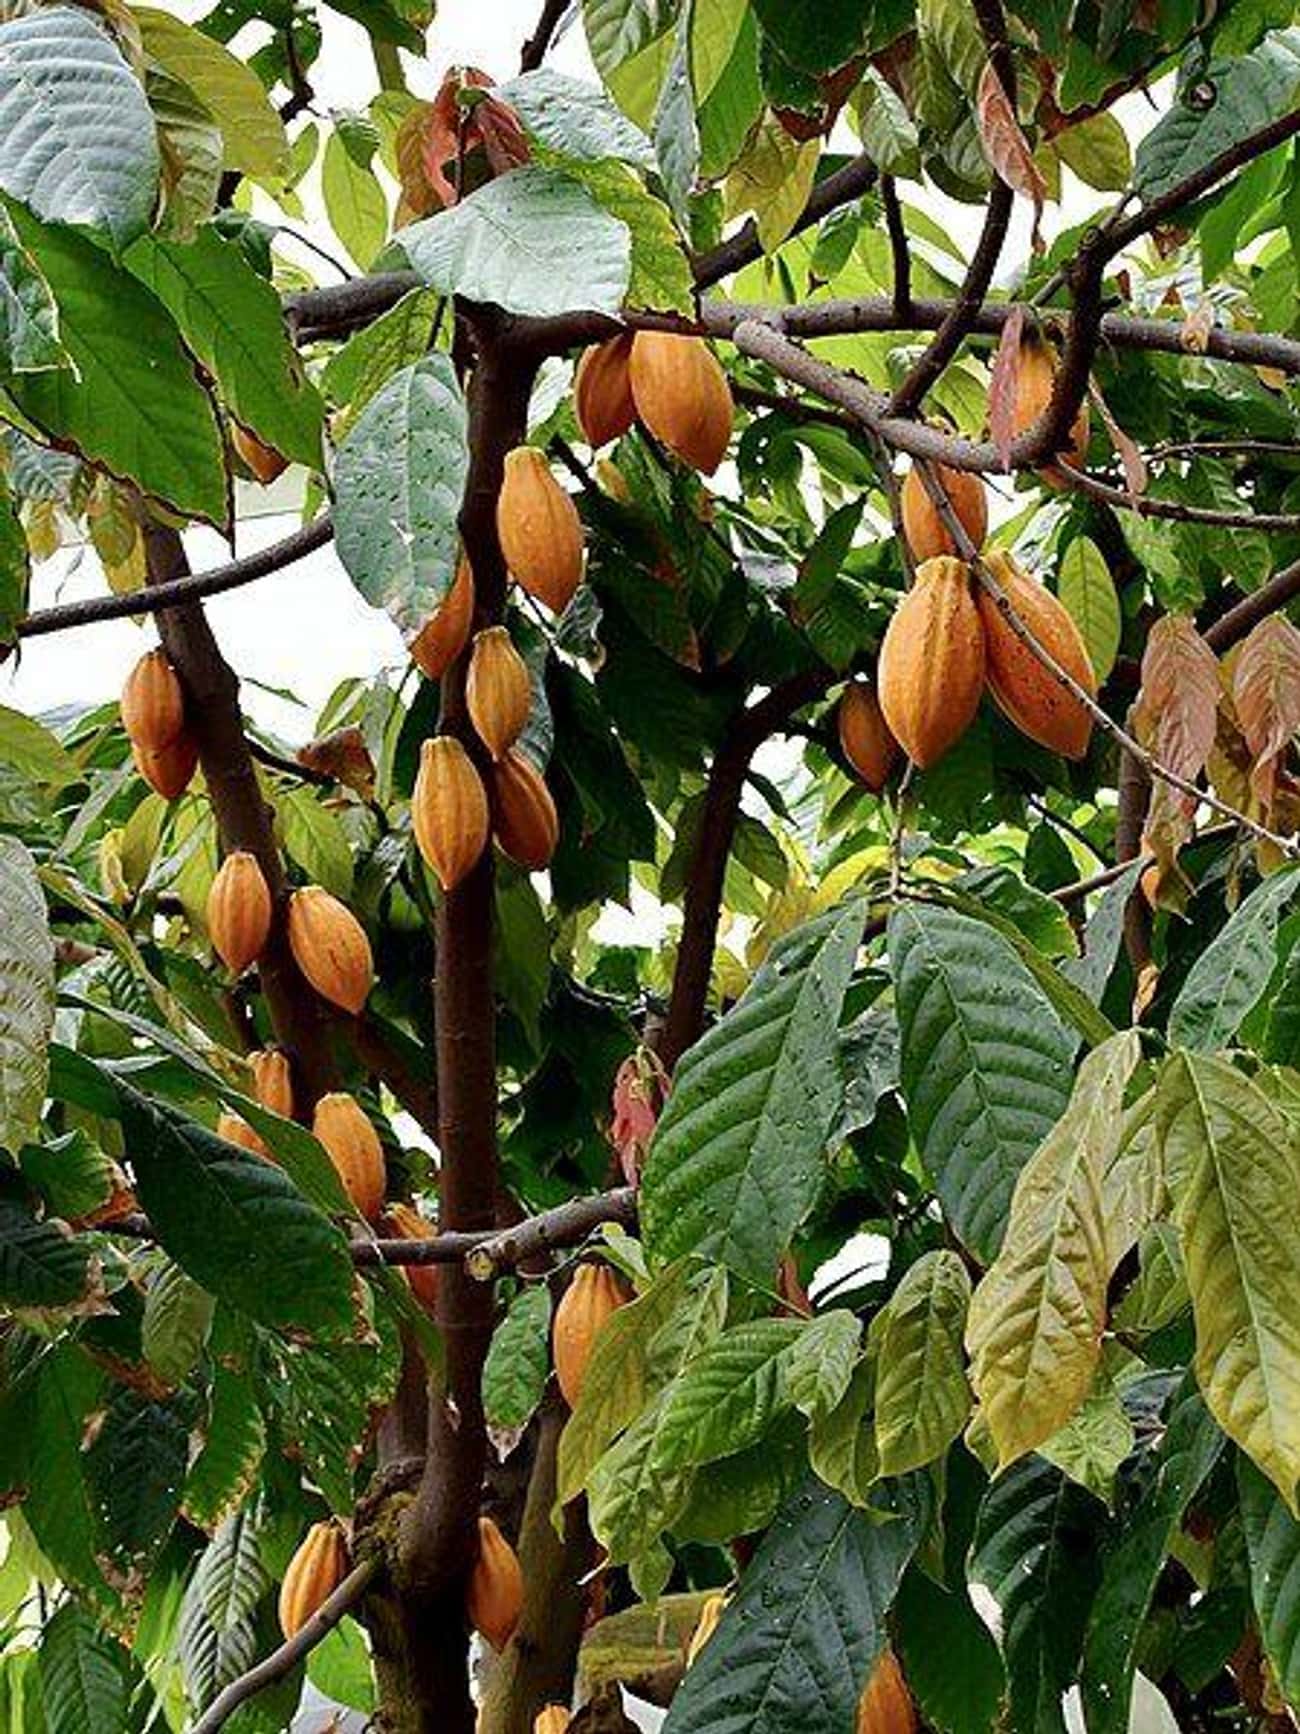 Humans Have Been Cultivating Cacao For Thousands Of Years